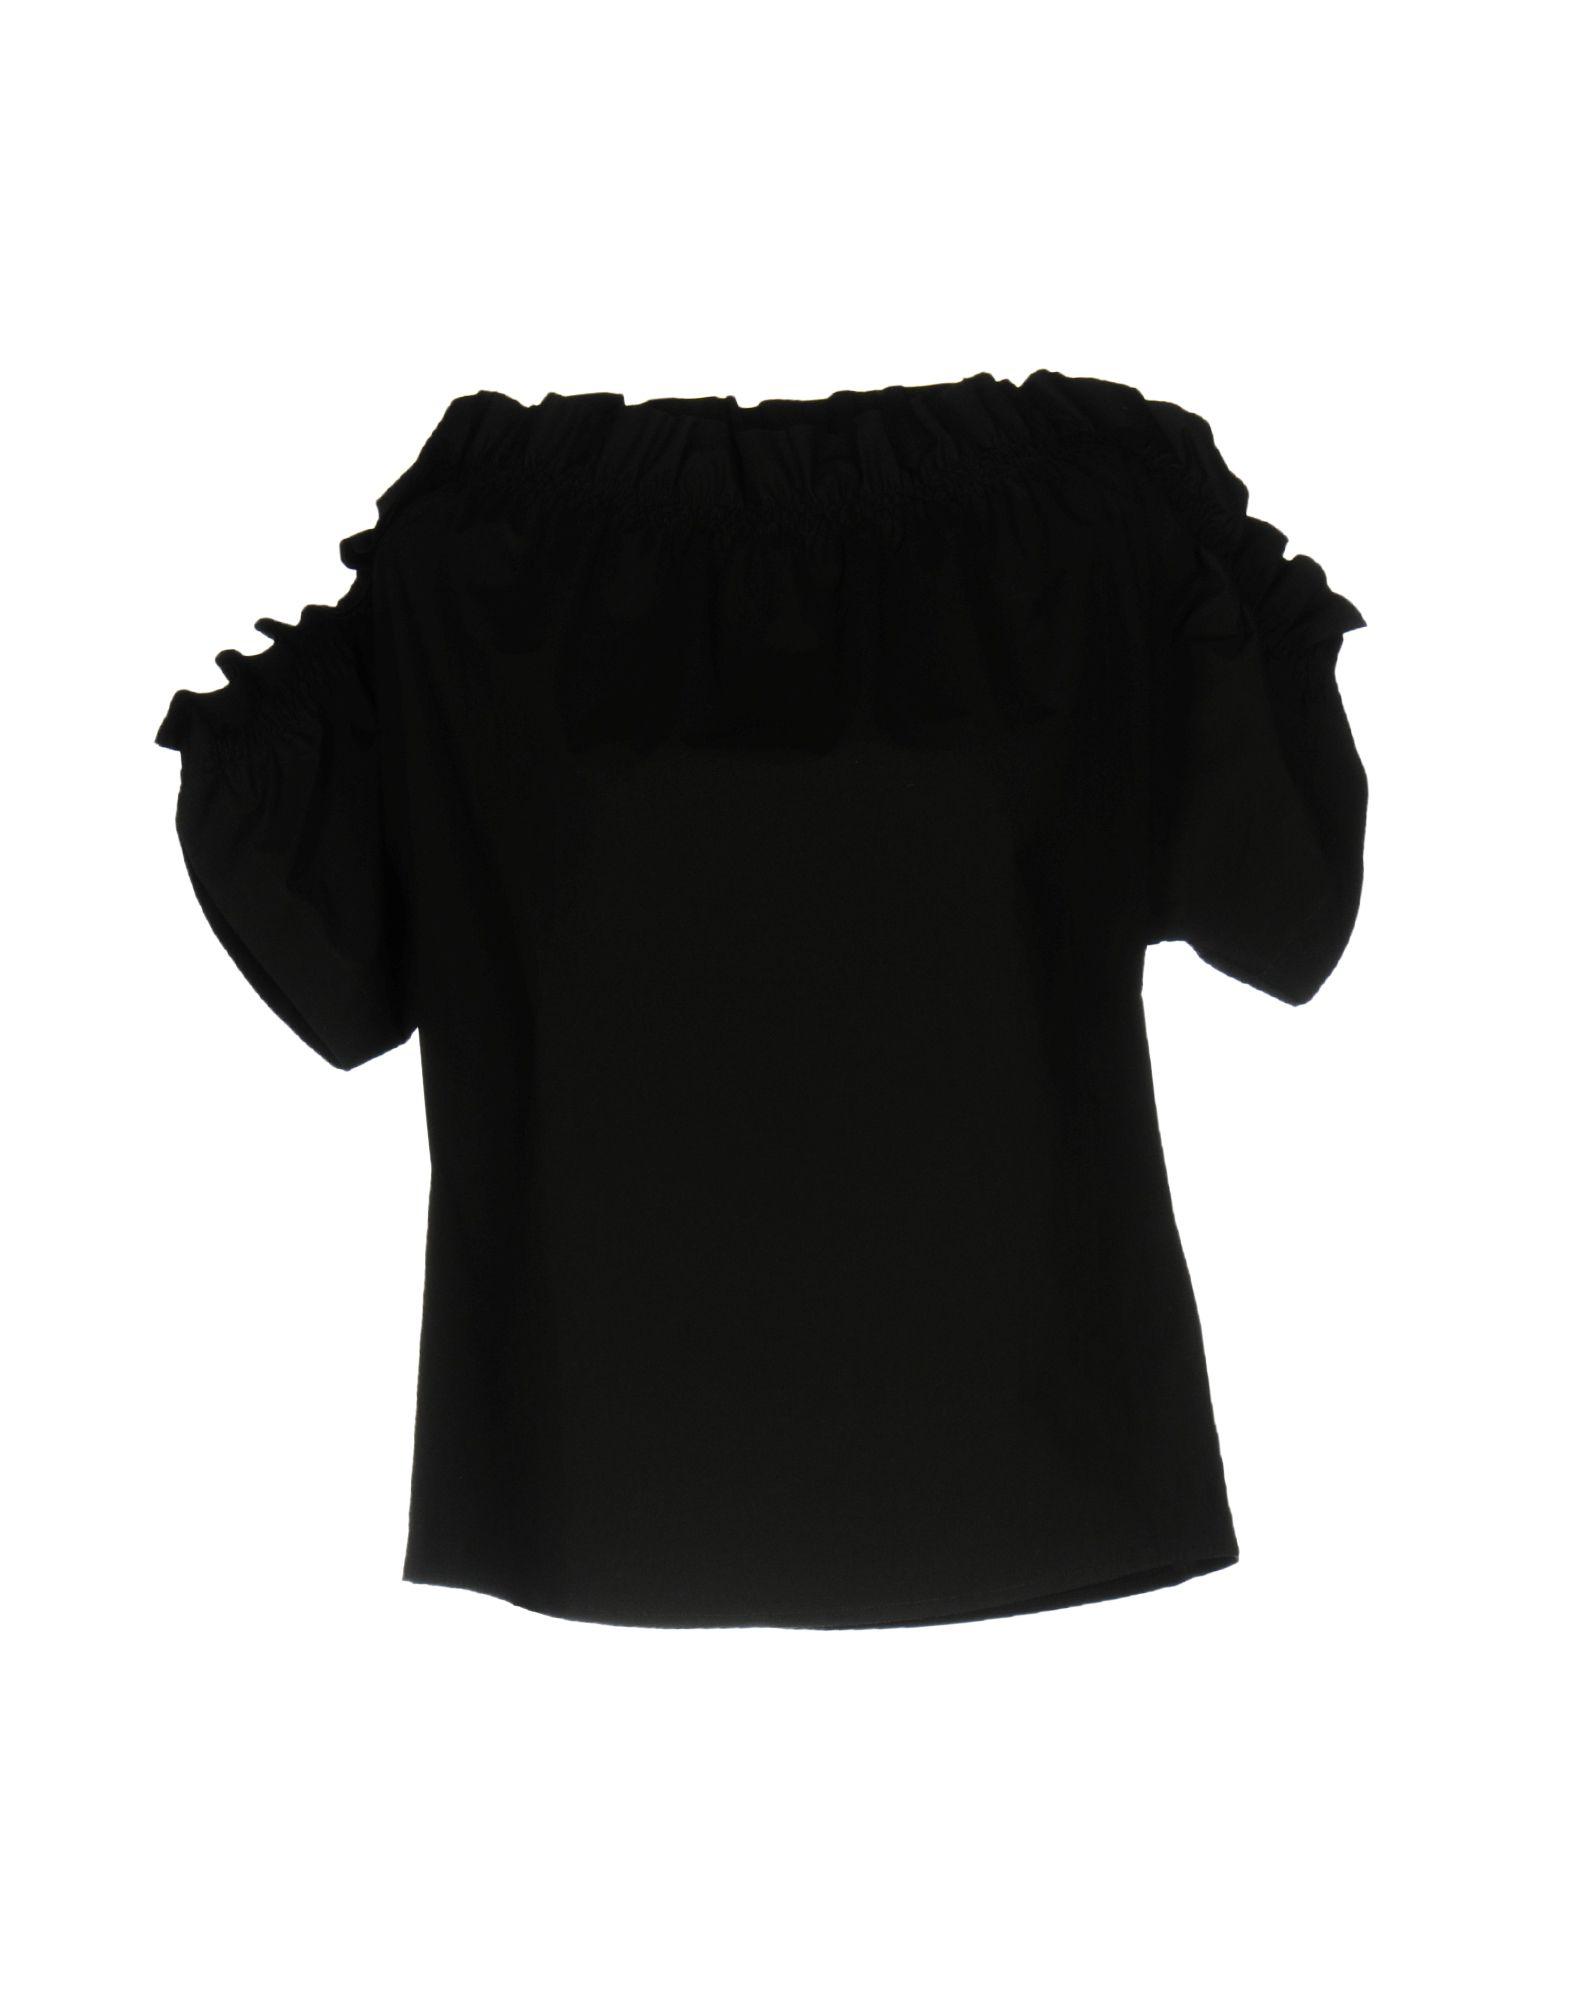 MSGM Cotton Blouse in Black - Lyst